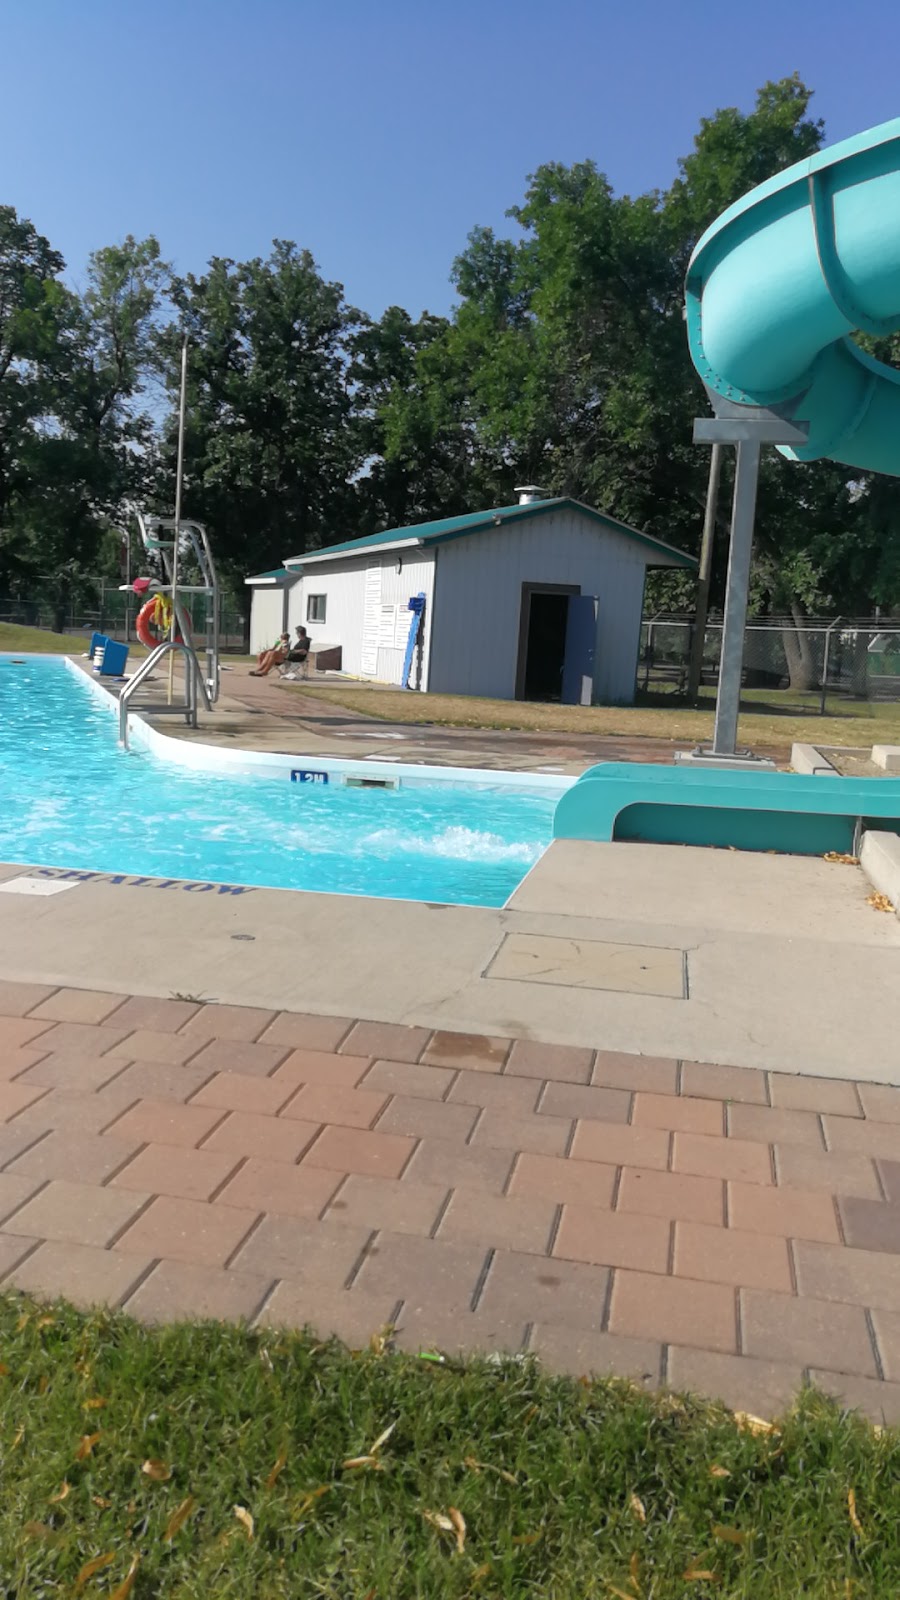 Carman Pool & Campground | campground | Box 160, 30 Kings Park Rd, Carman, MB R0G 0J0, Canada | 2047453814 OR +1 204-745-3814